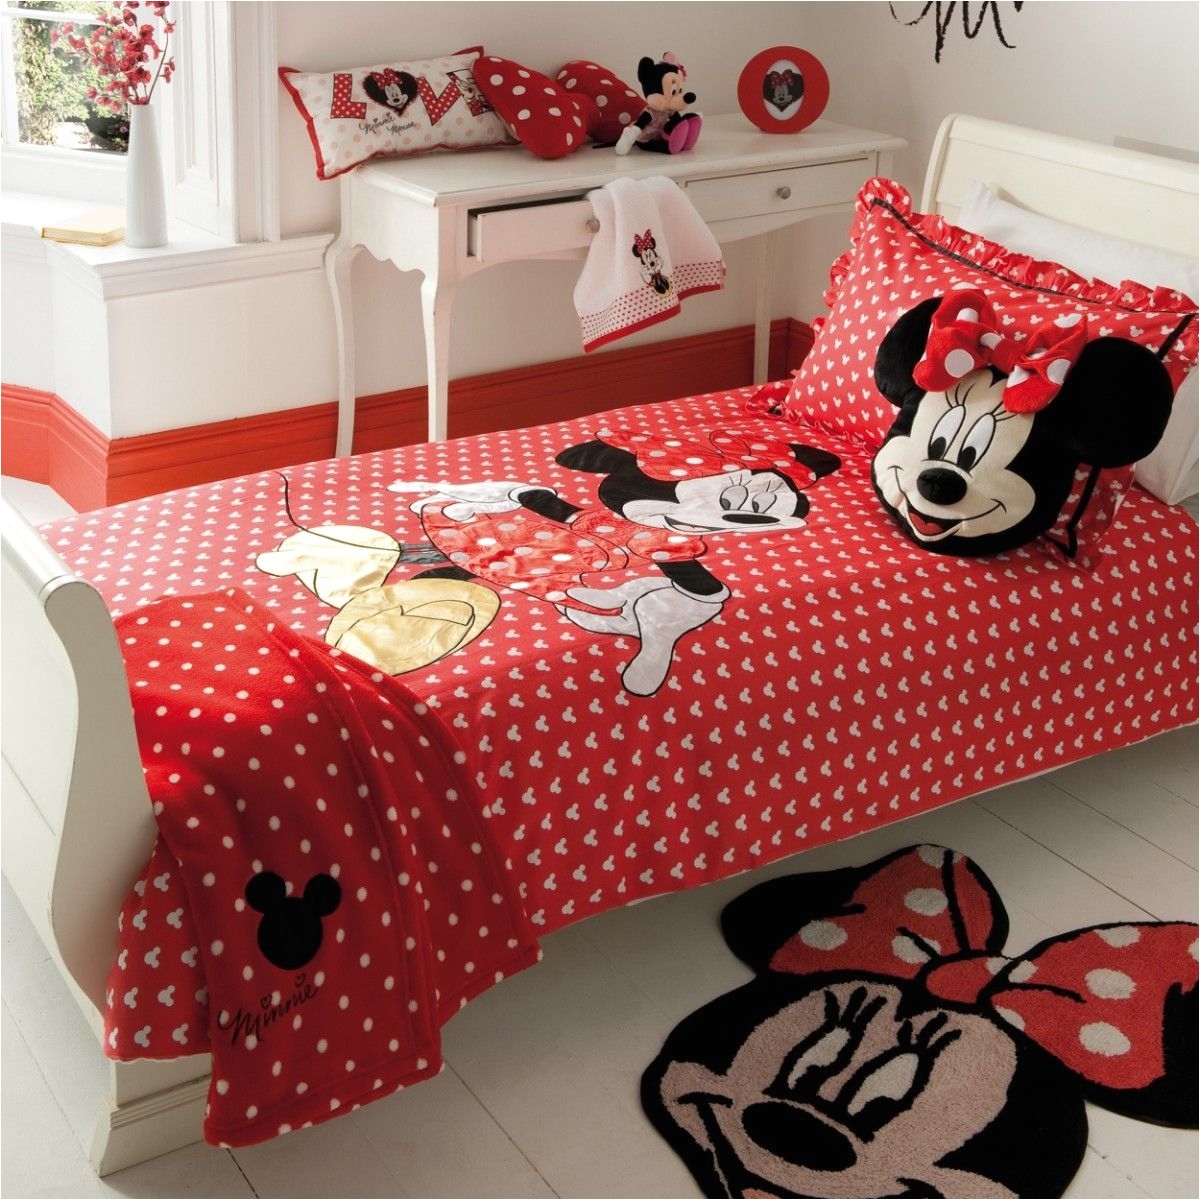 decor minnie mouse bedroom decor decorating ideas for kids rooms with white on red for the room and the room furniture minnie mouse bedroom decor for little